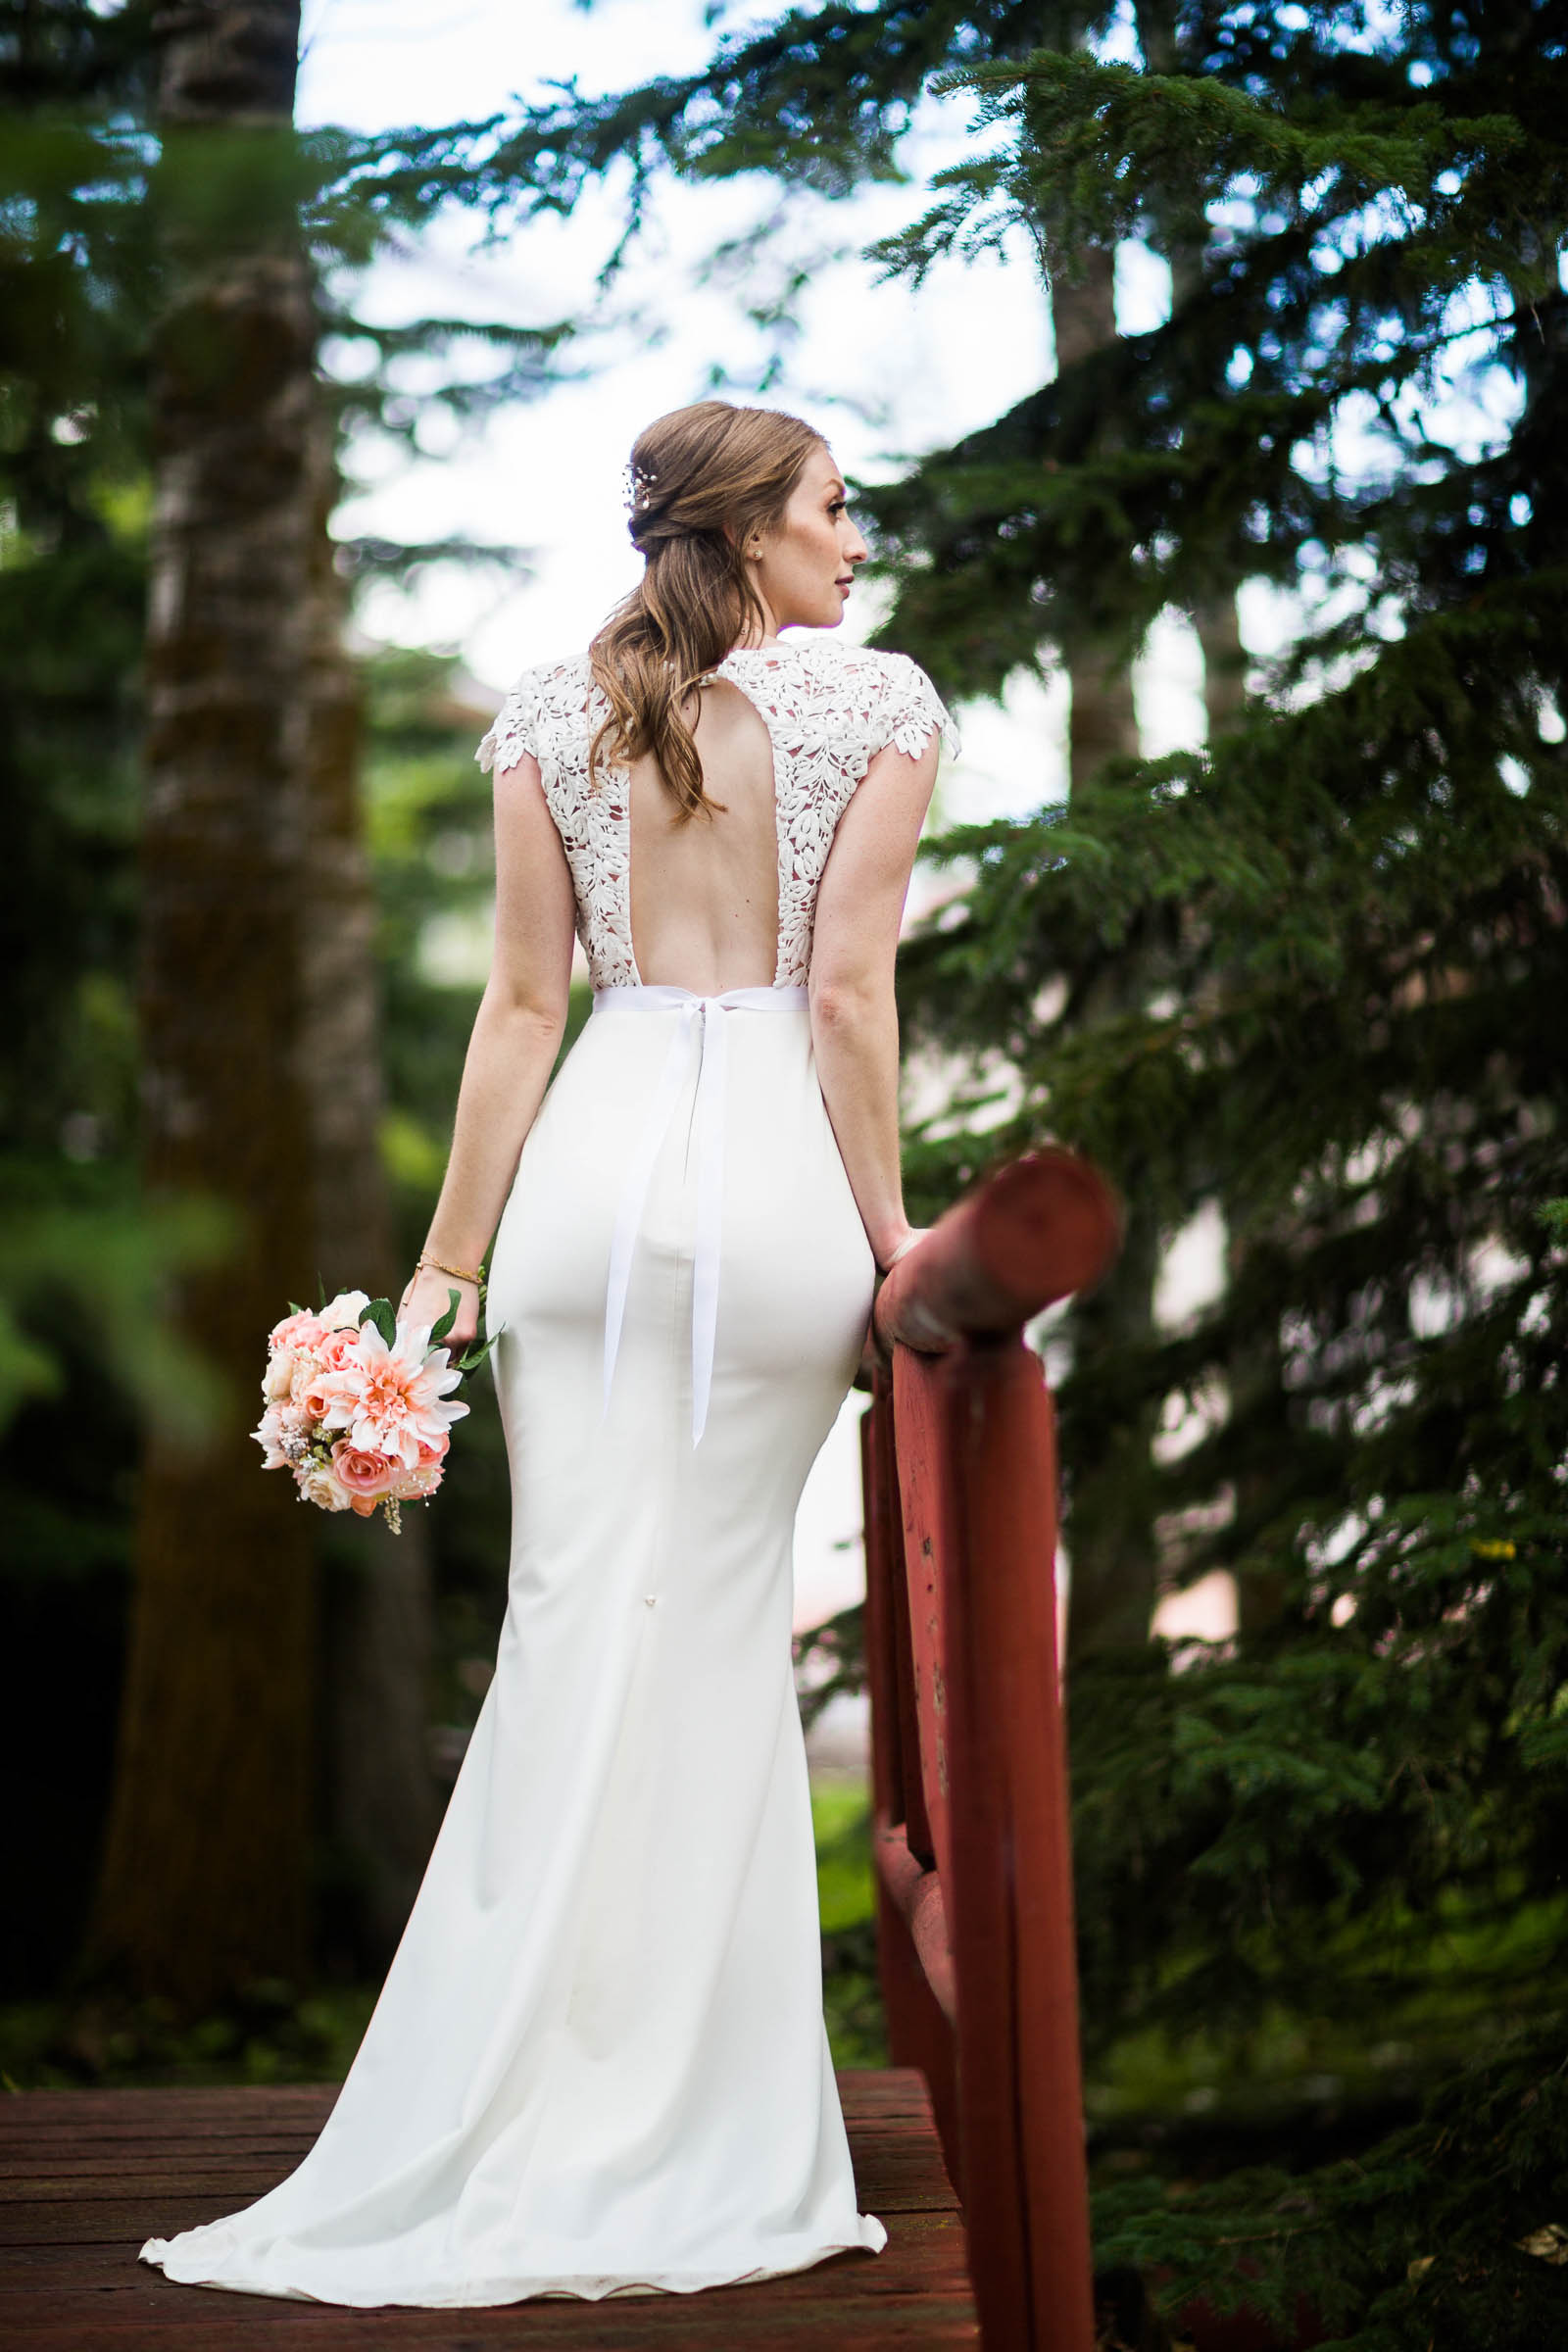 Bride in classic fitted wedding gown with keyhole back, lace bodice and lace cap sleeves holding blush bouquet